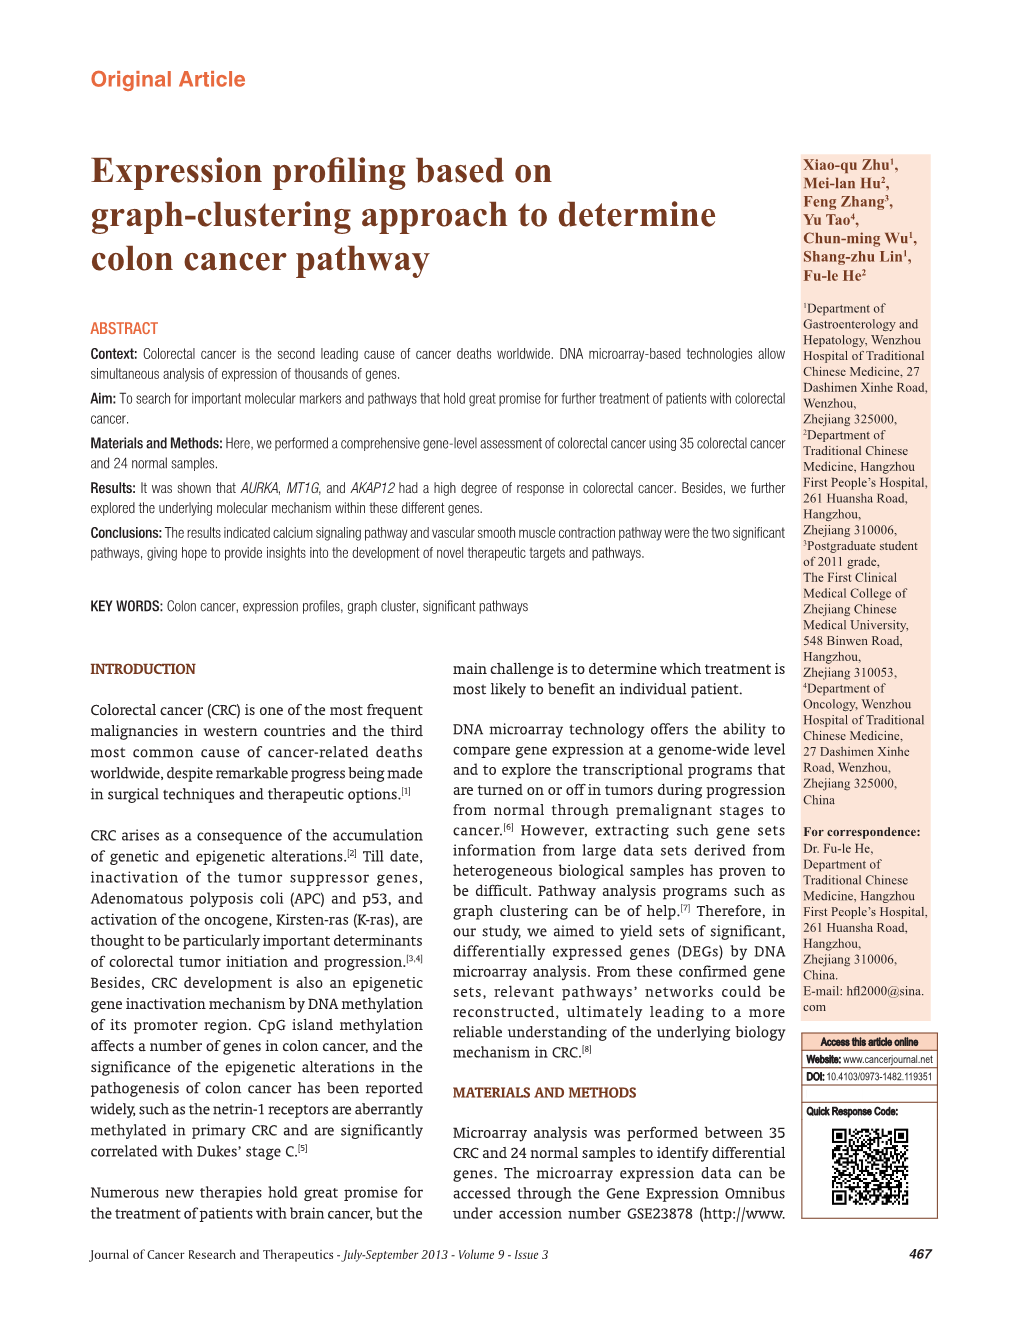 Expression Profiling Based on Graph-Clustering Approach to Determine and Protein Characterization of BRAF- and K-RAS-Mutated Colorectal Colon Cancer Pathway